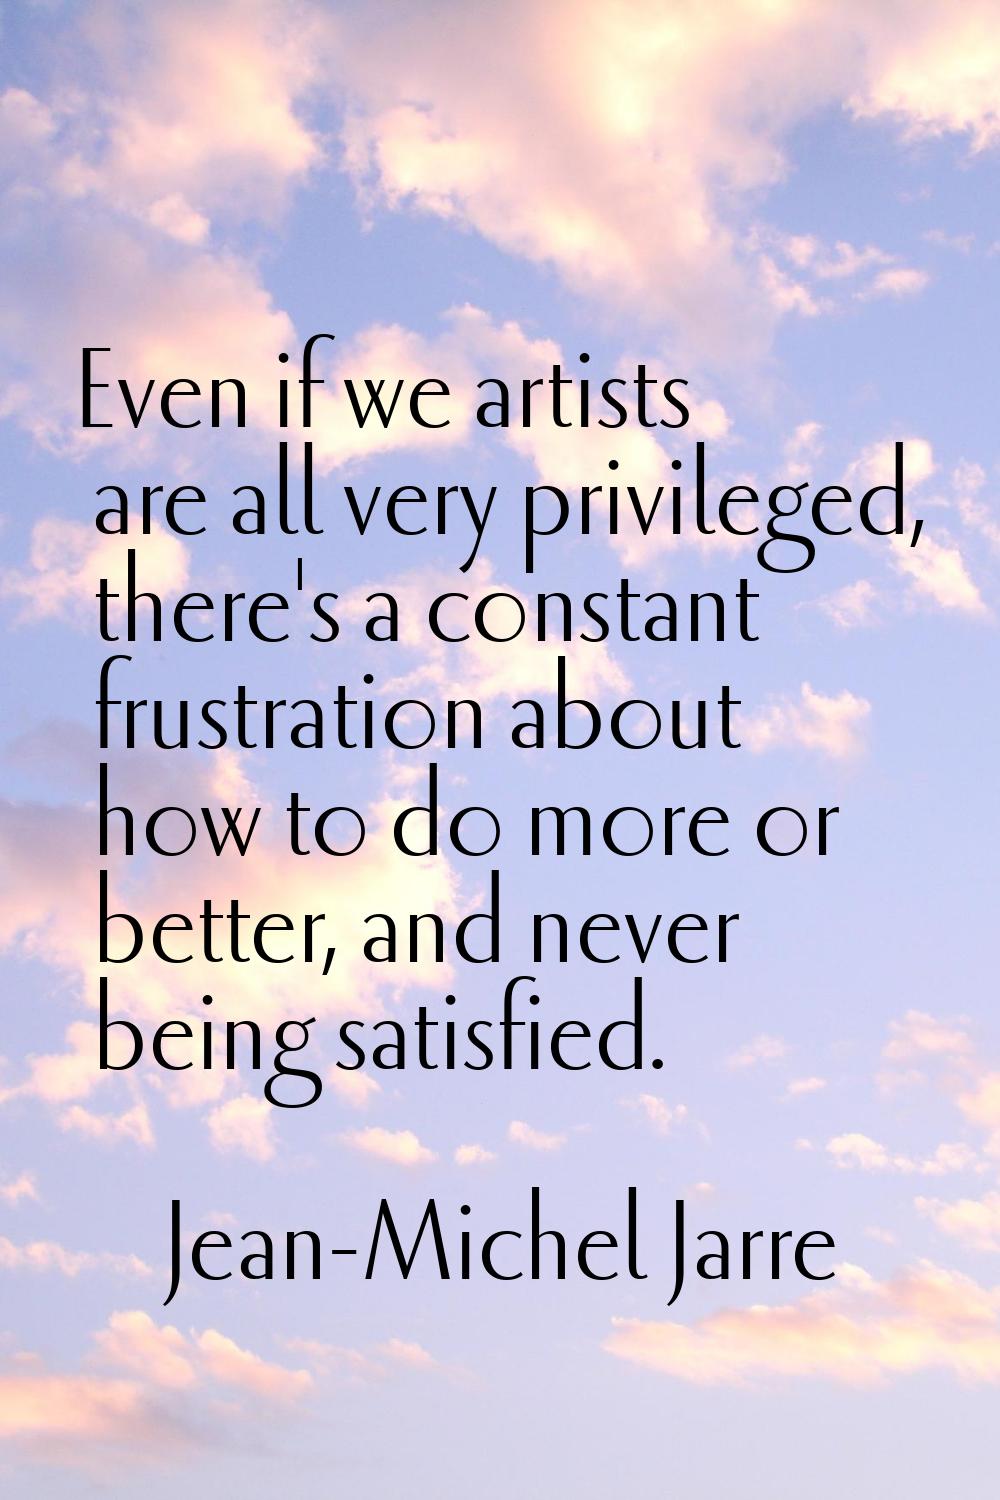 Even if we artists are all very privileged, there's a constant frustration about how to do more or 